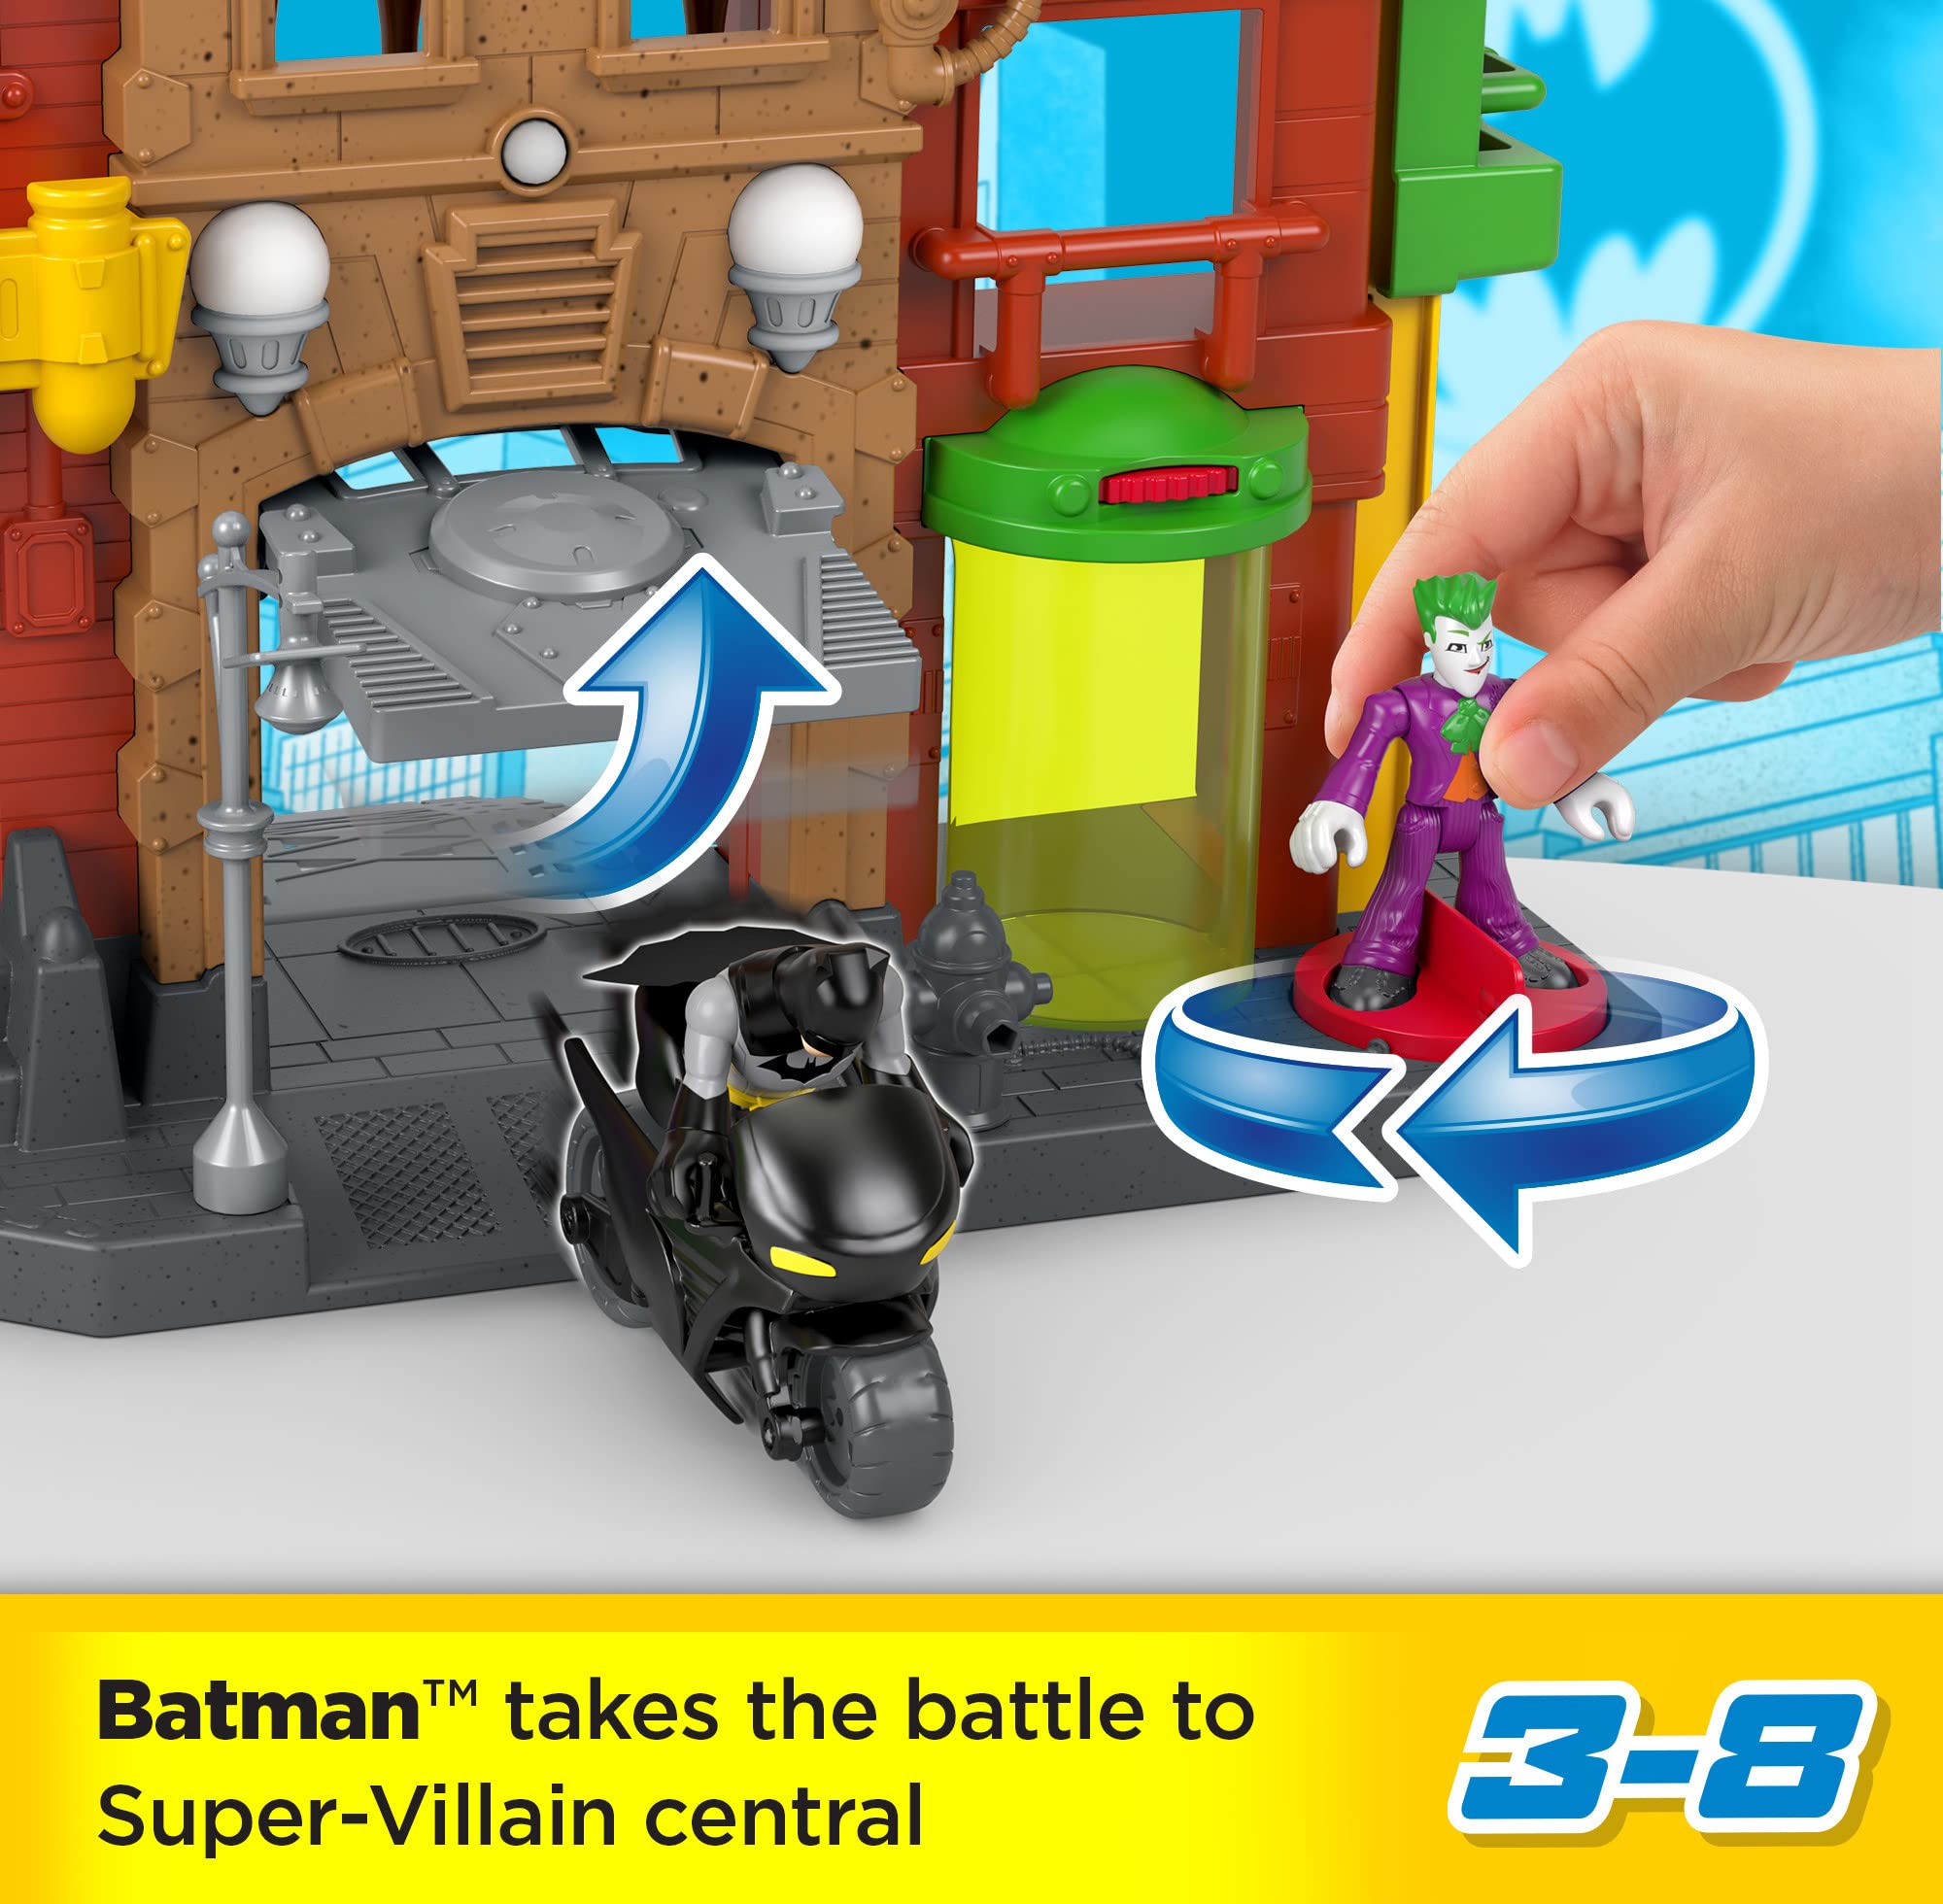 Imaginext DC Super Friends Batman Playset Crime Alley with Character Figures & Accessories for Pretend Play Ages 3+ Years (Amazon Exclusive)